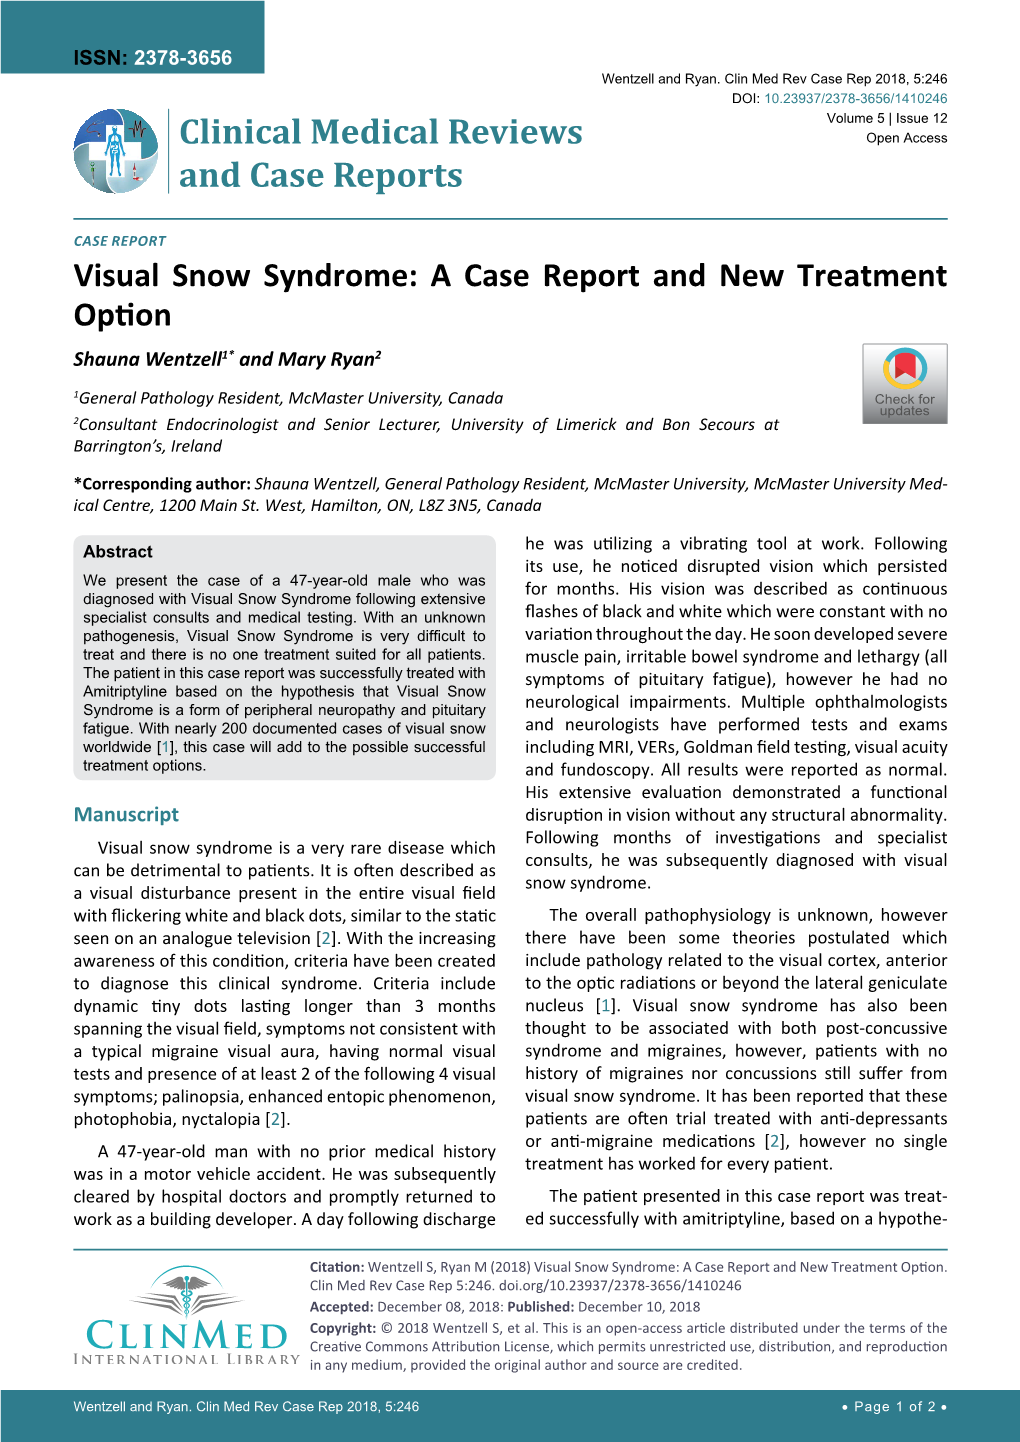 Visual Snow Syndrome: a Case Report and New Treatment Option Shauna Wentzell1* and Mary Ryan2